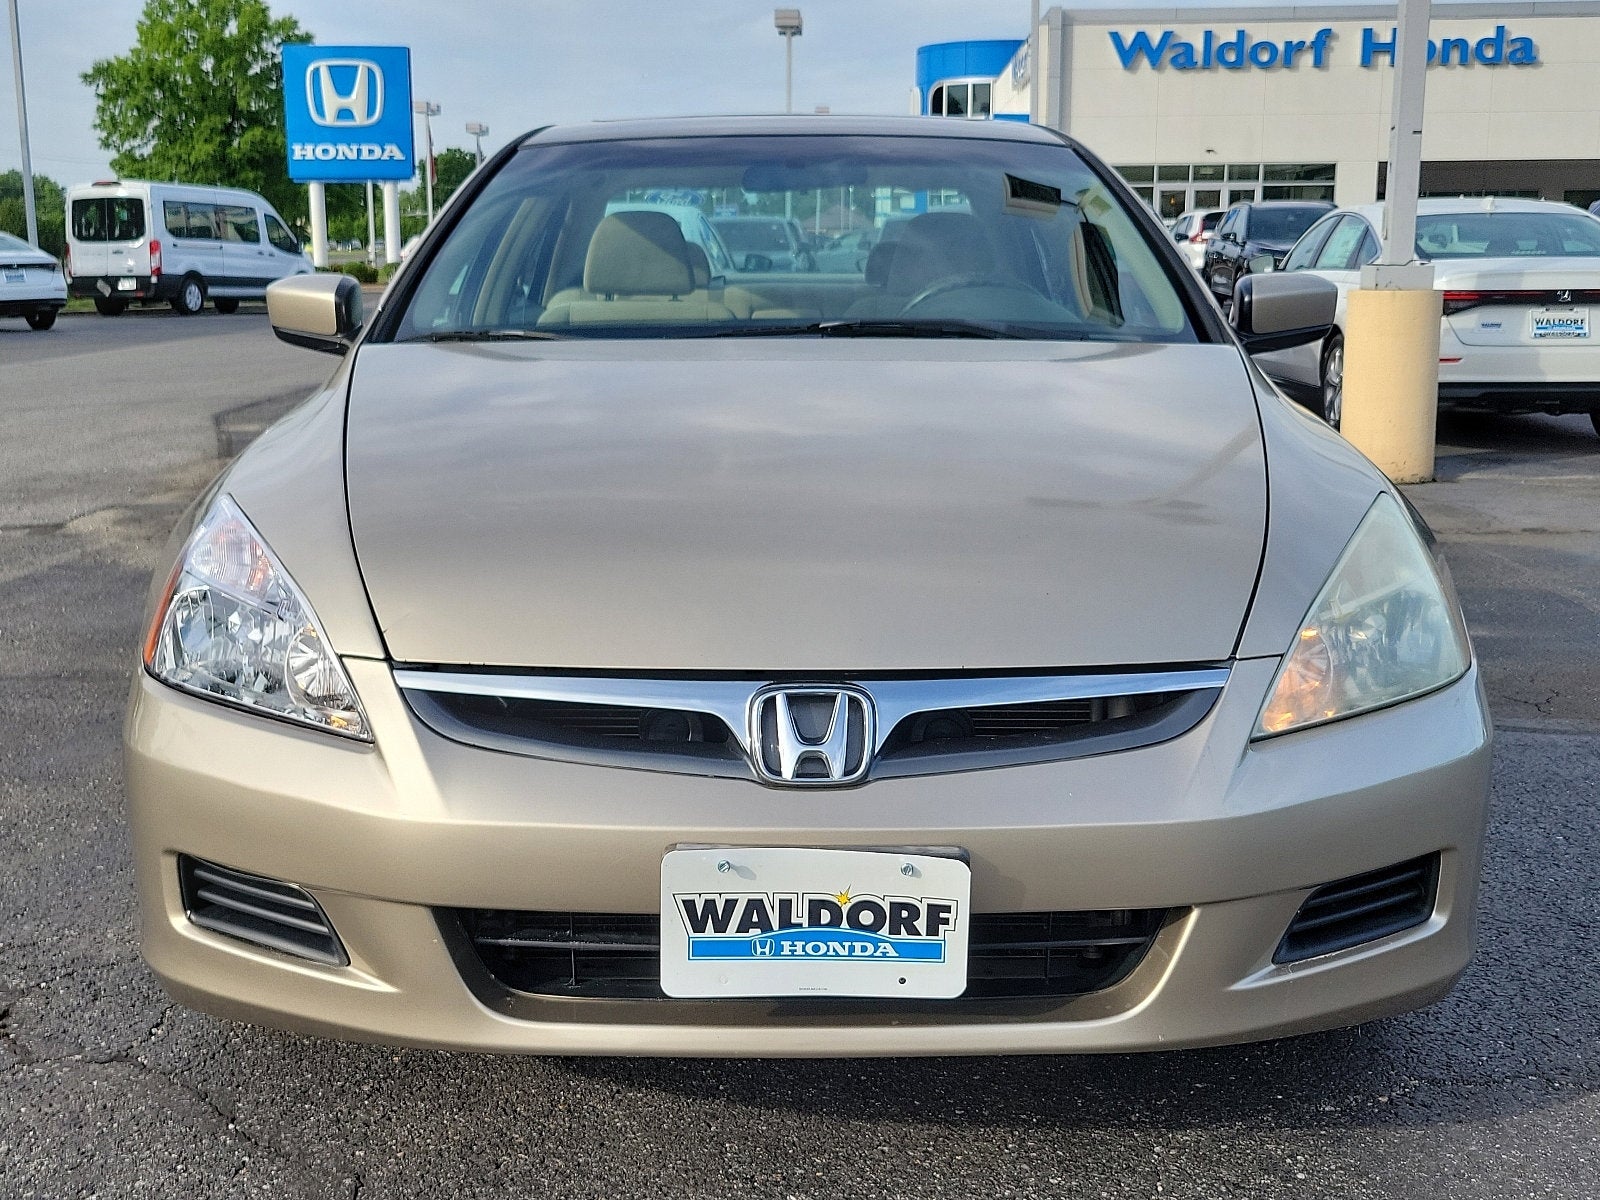 Used 2007 Honda Accord EX with VIN 1HGCM56797A024189 for sale in Prince Frederick, MD